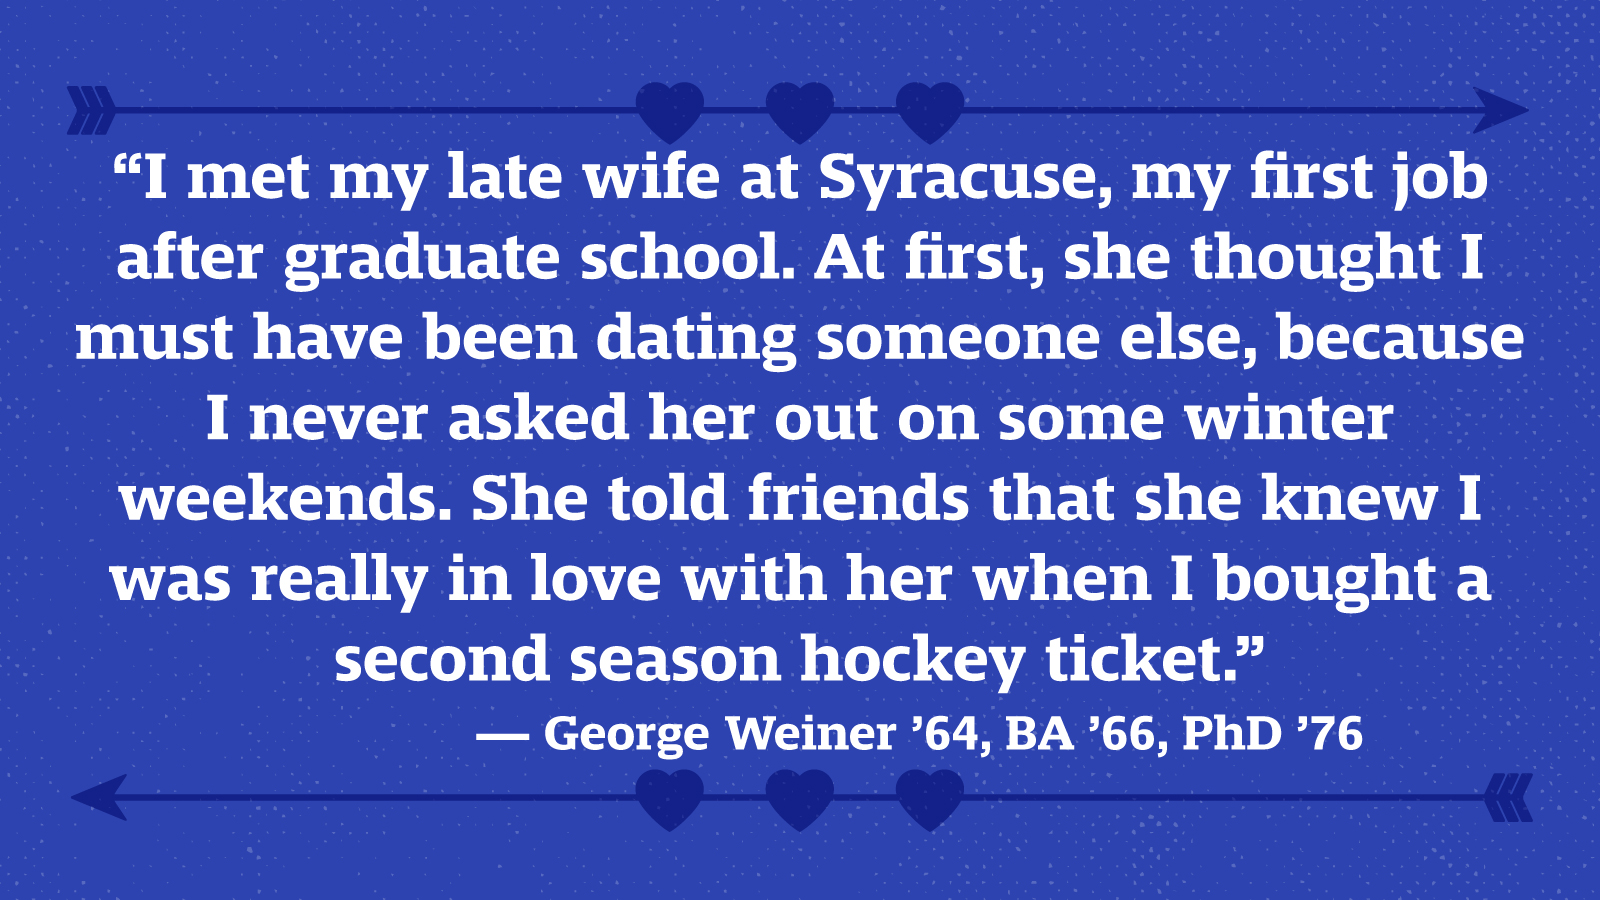 “I met my late wife at Syracuse, my first job after graduate school. At first, she thought I must have been dating someone else, because I never asked her out on some winter weekends. She told friends that she knew I was really in love with her when I bought a second season hockey ticket.” — George Weiner ’64, BA ’66, PhD ’76